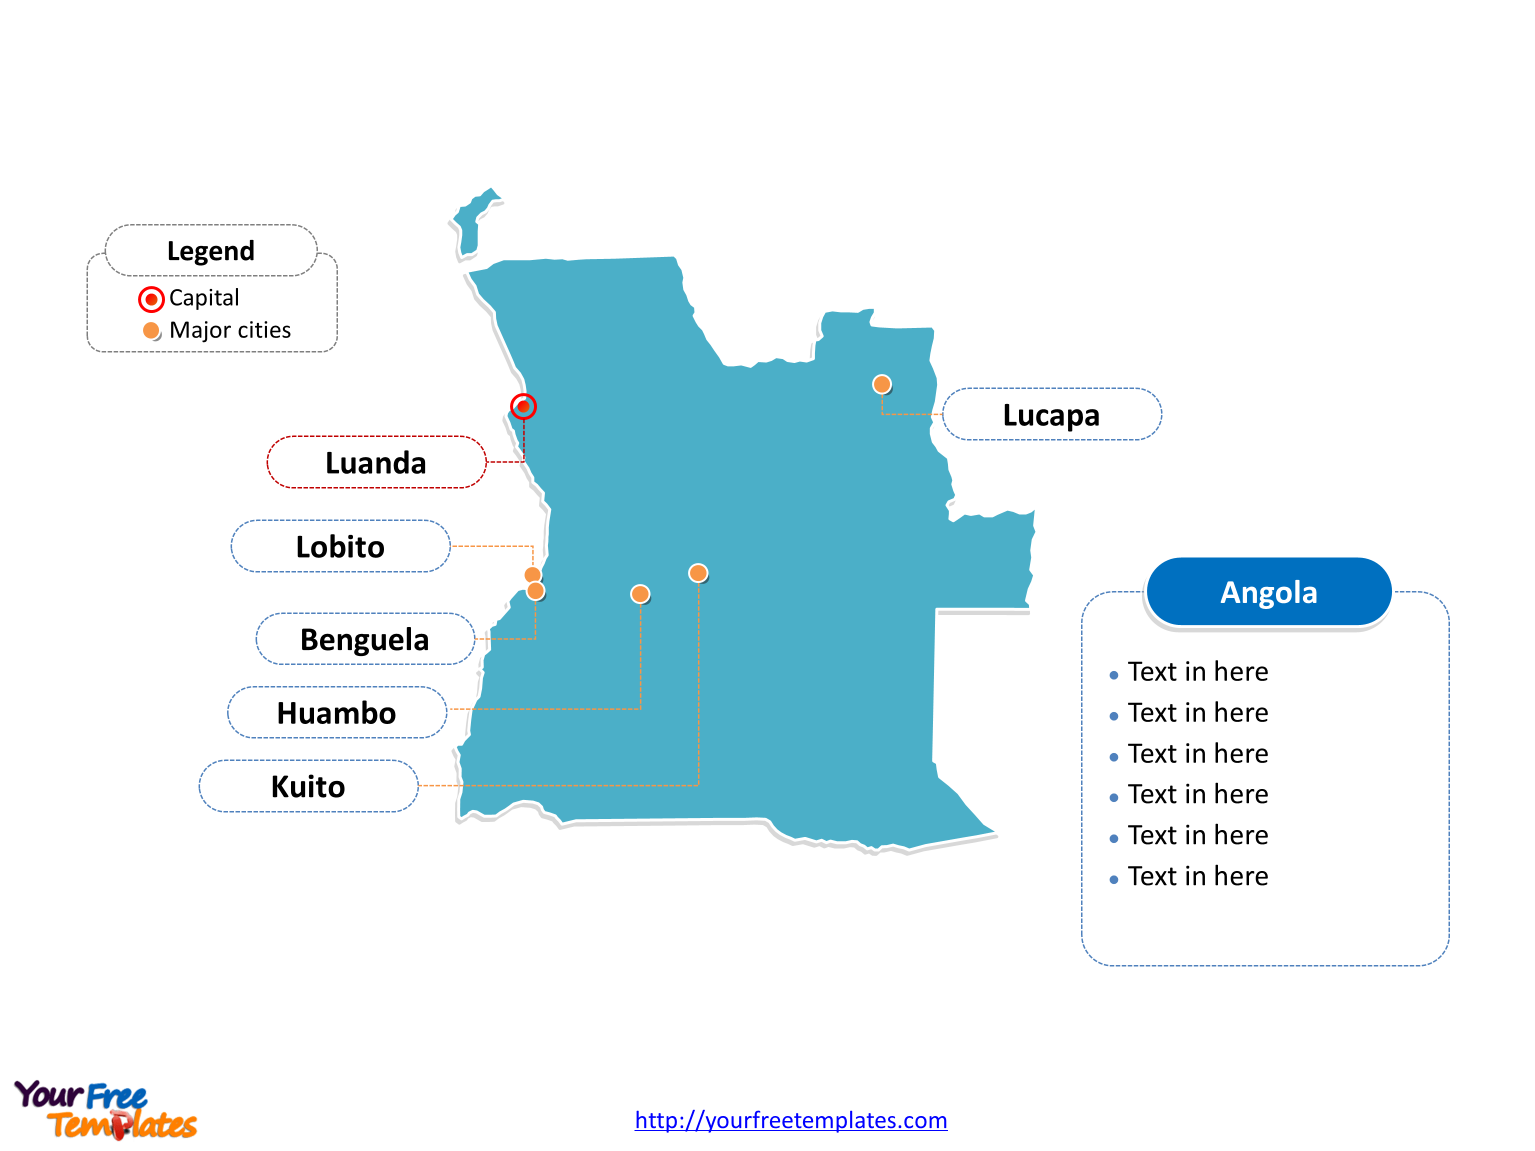 Angola Outline map labeled with cities